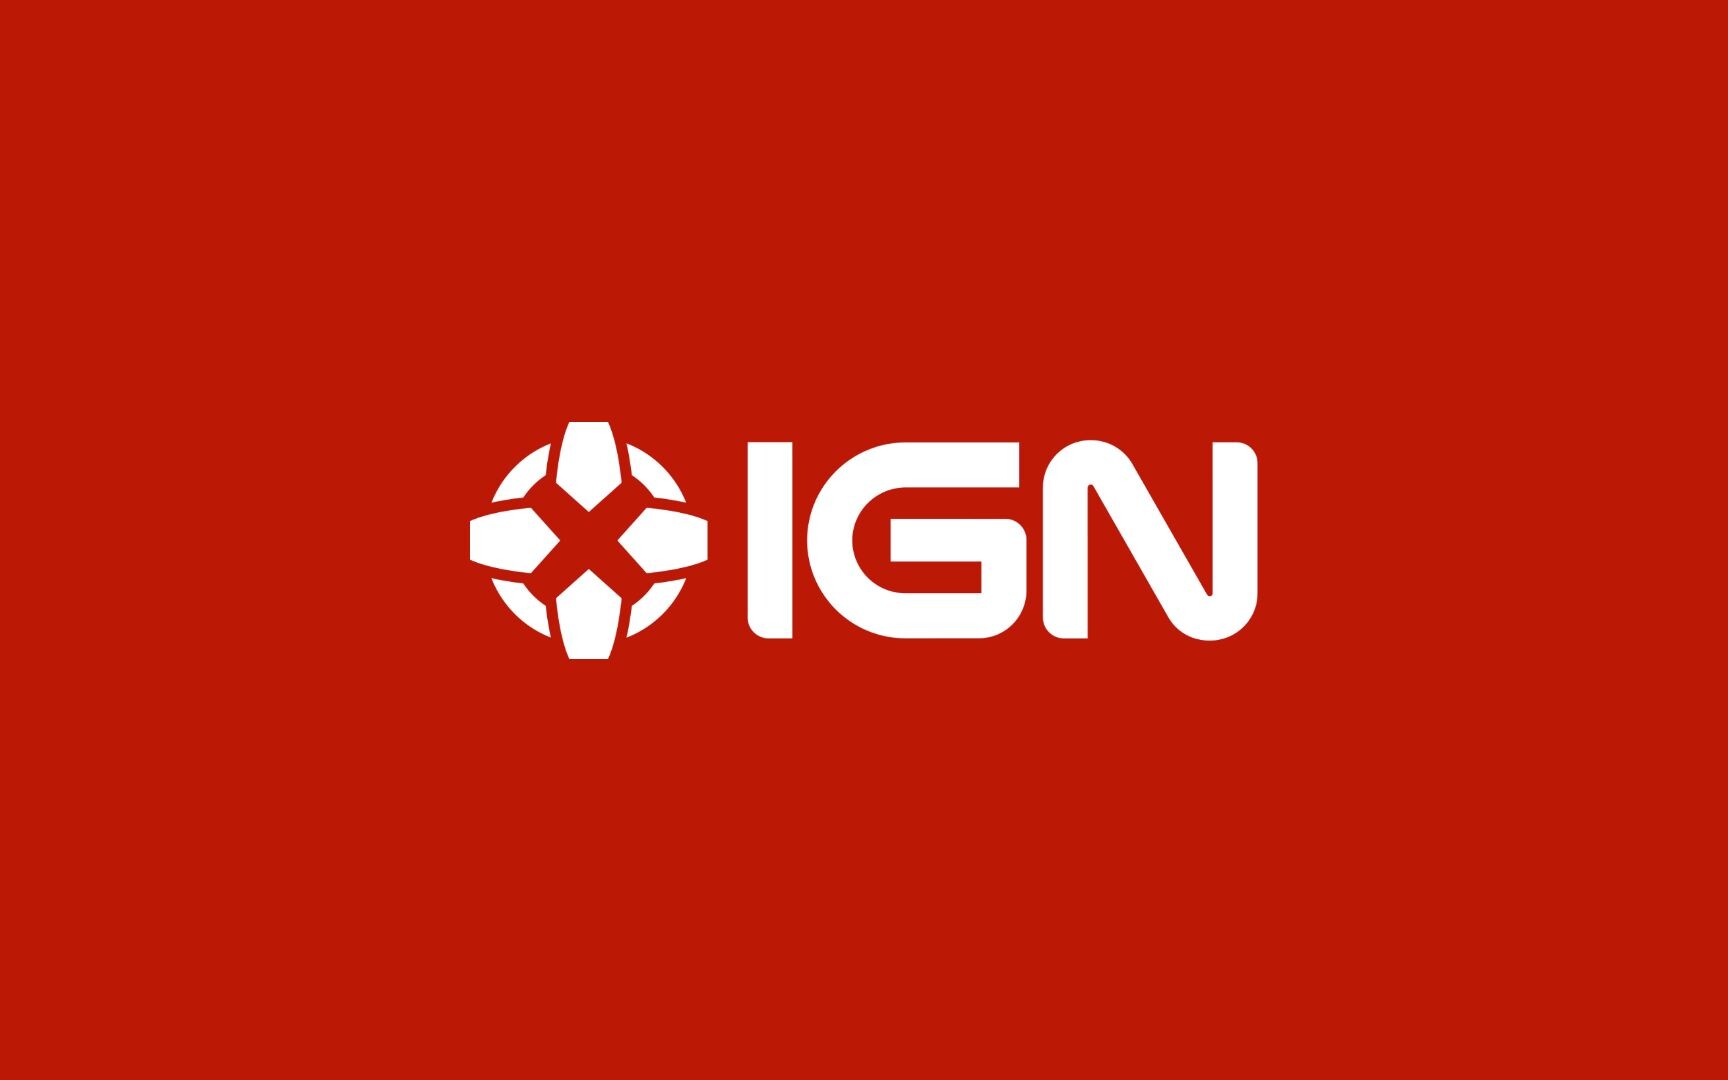 IGN expands its empire and takes over leading websites.  The gaming industry was shaken